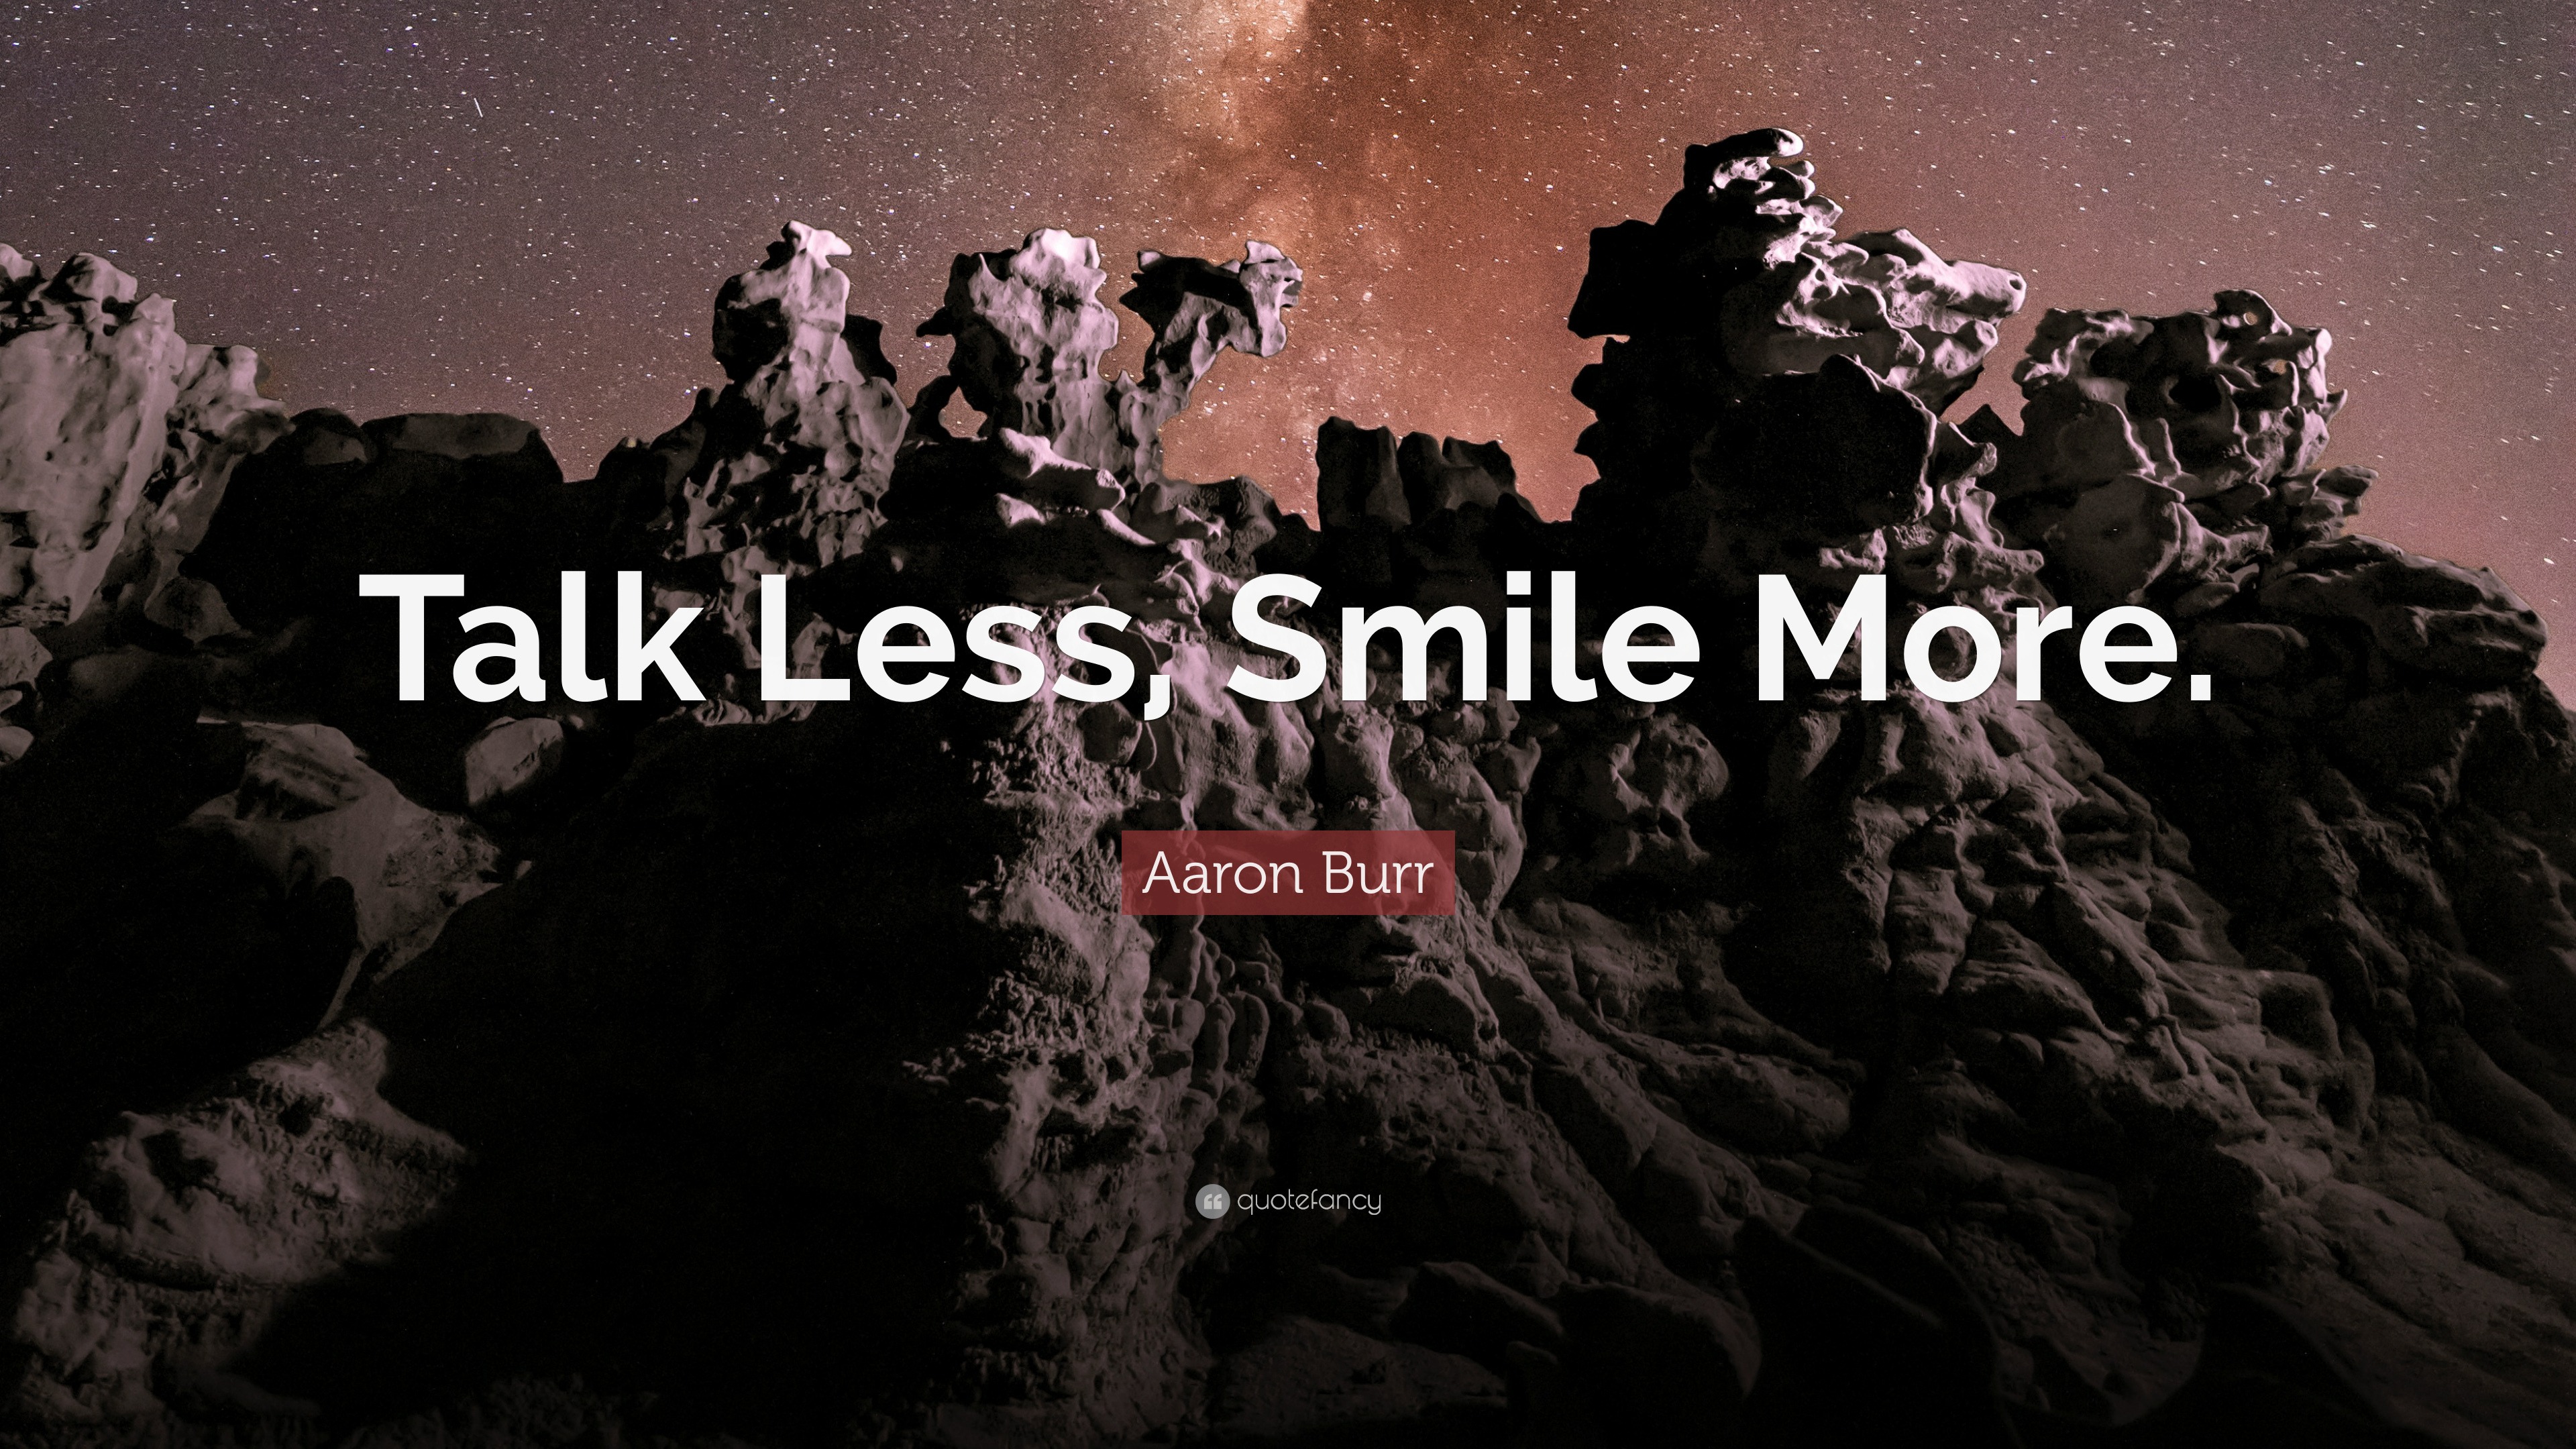 Aaron Burr Quote: “Talk Less, Smile More.”